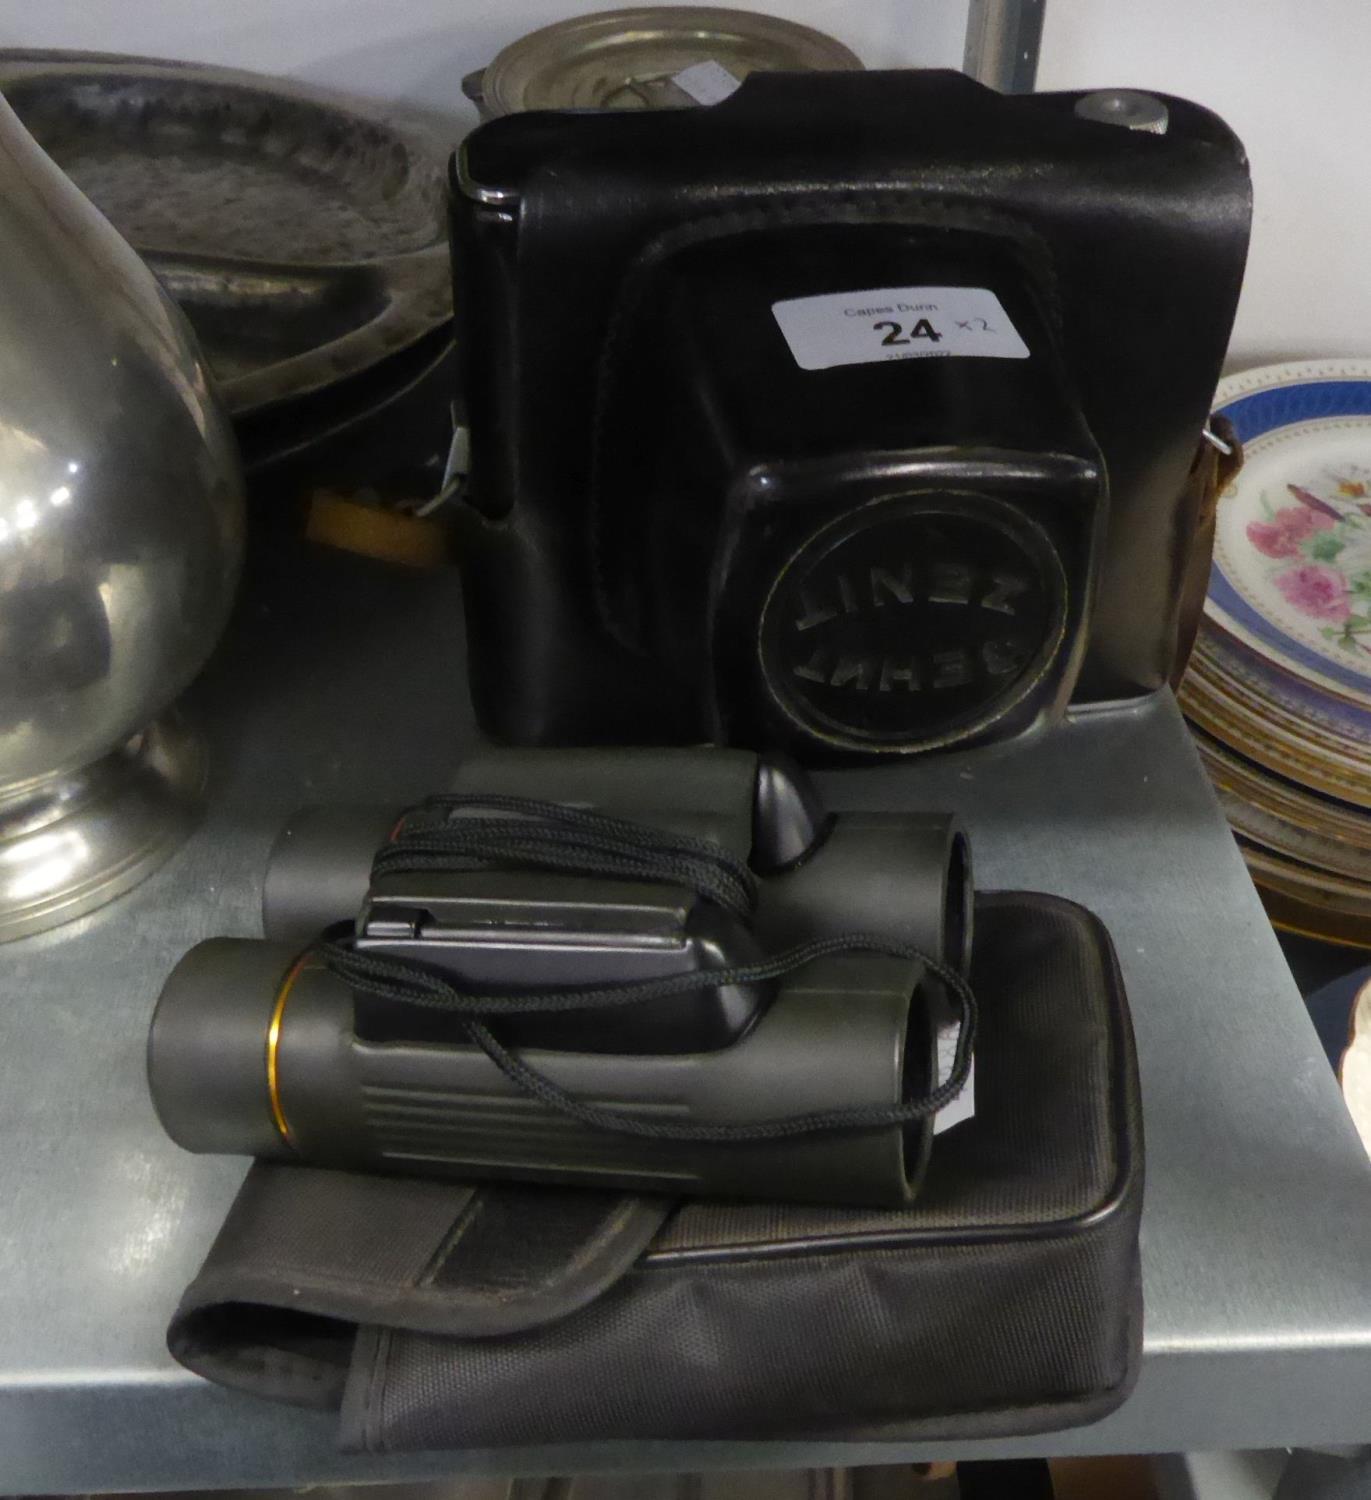 A PAIR OF 10 X 25 COMPACT BINOCULARS AND A ZENIT ? E SLR ROLL FILM CAMERA, IN CASE